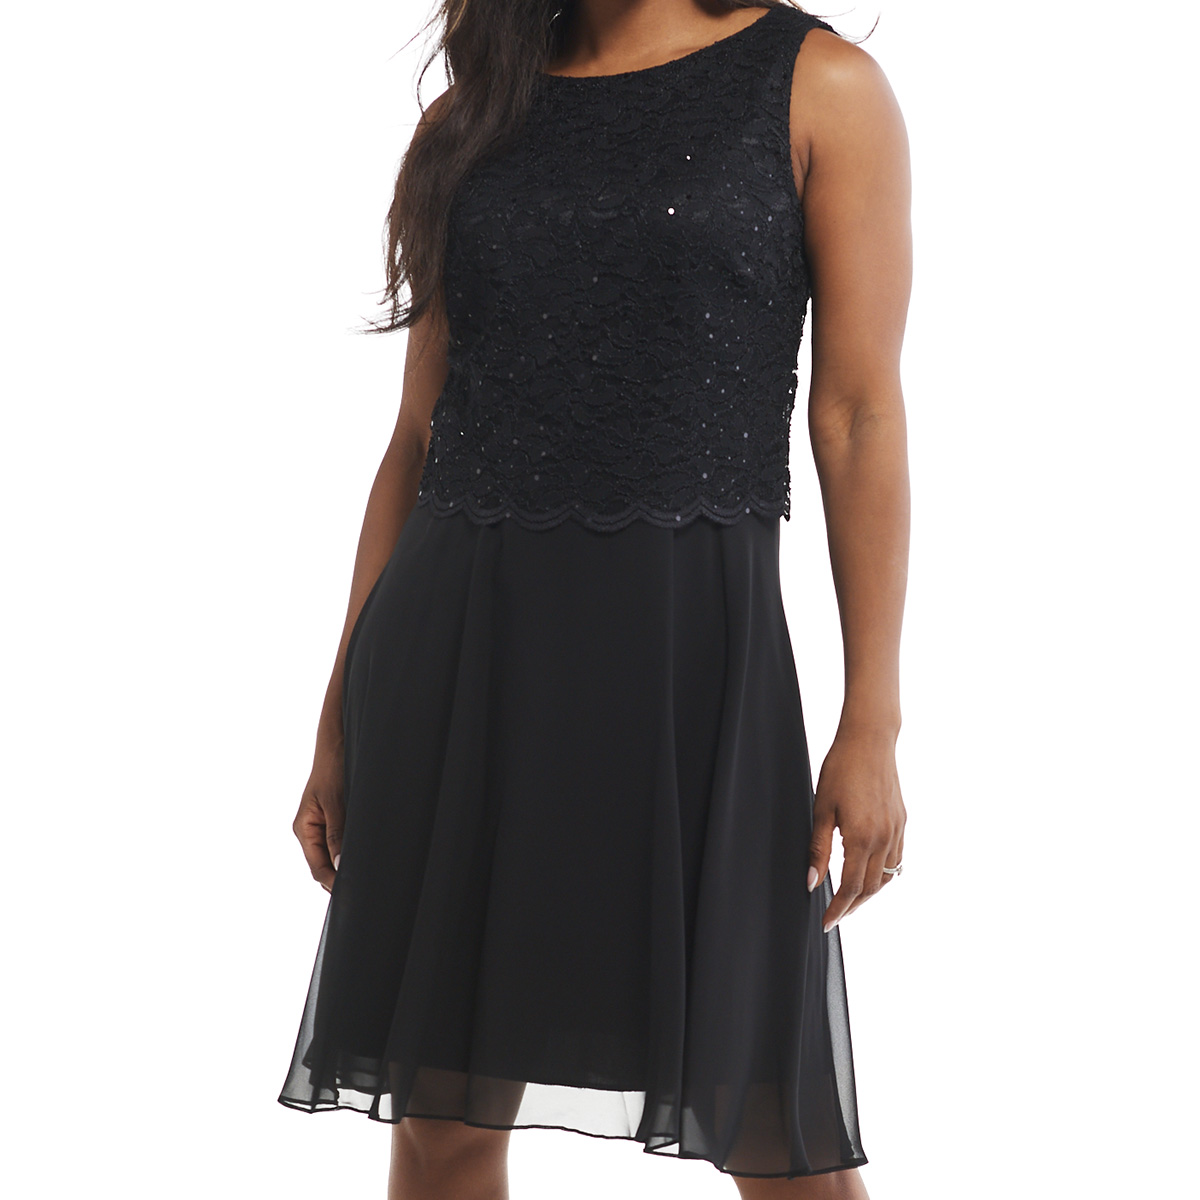 Petite Connected Apparel Sleeveless Sequin Lace Popover Dress